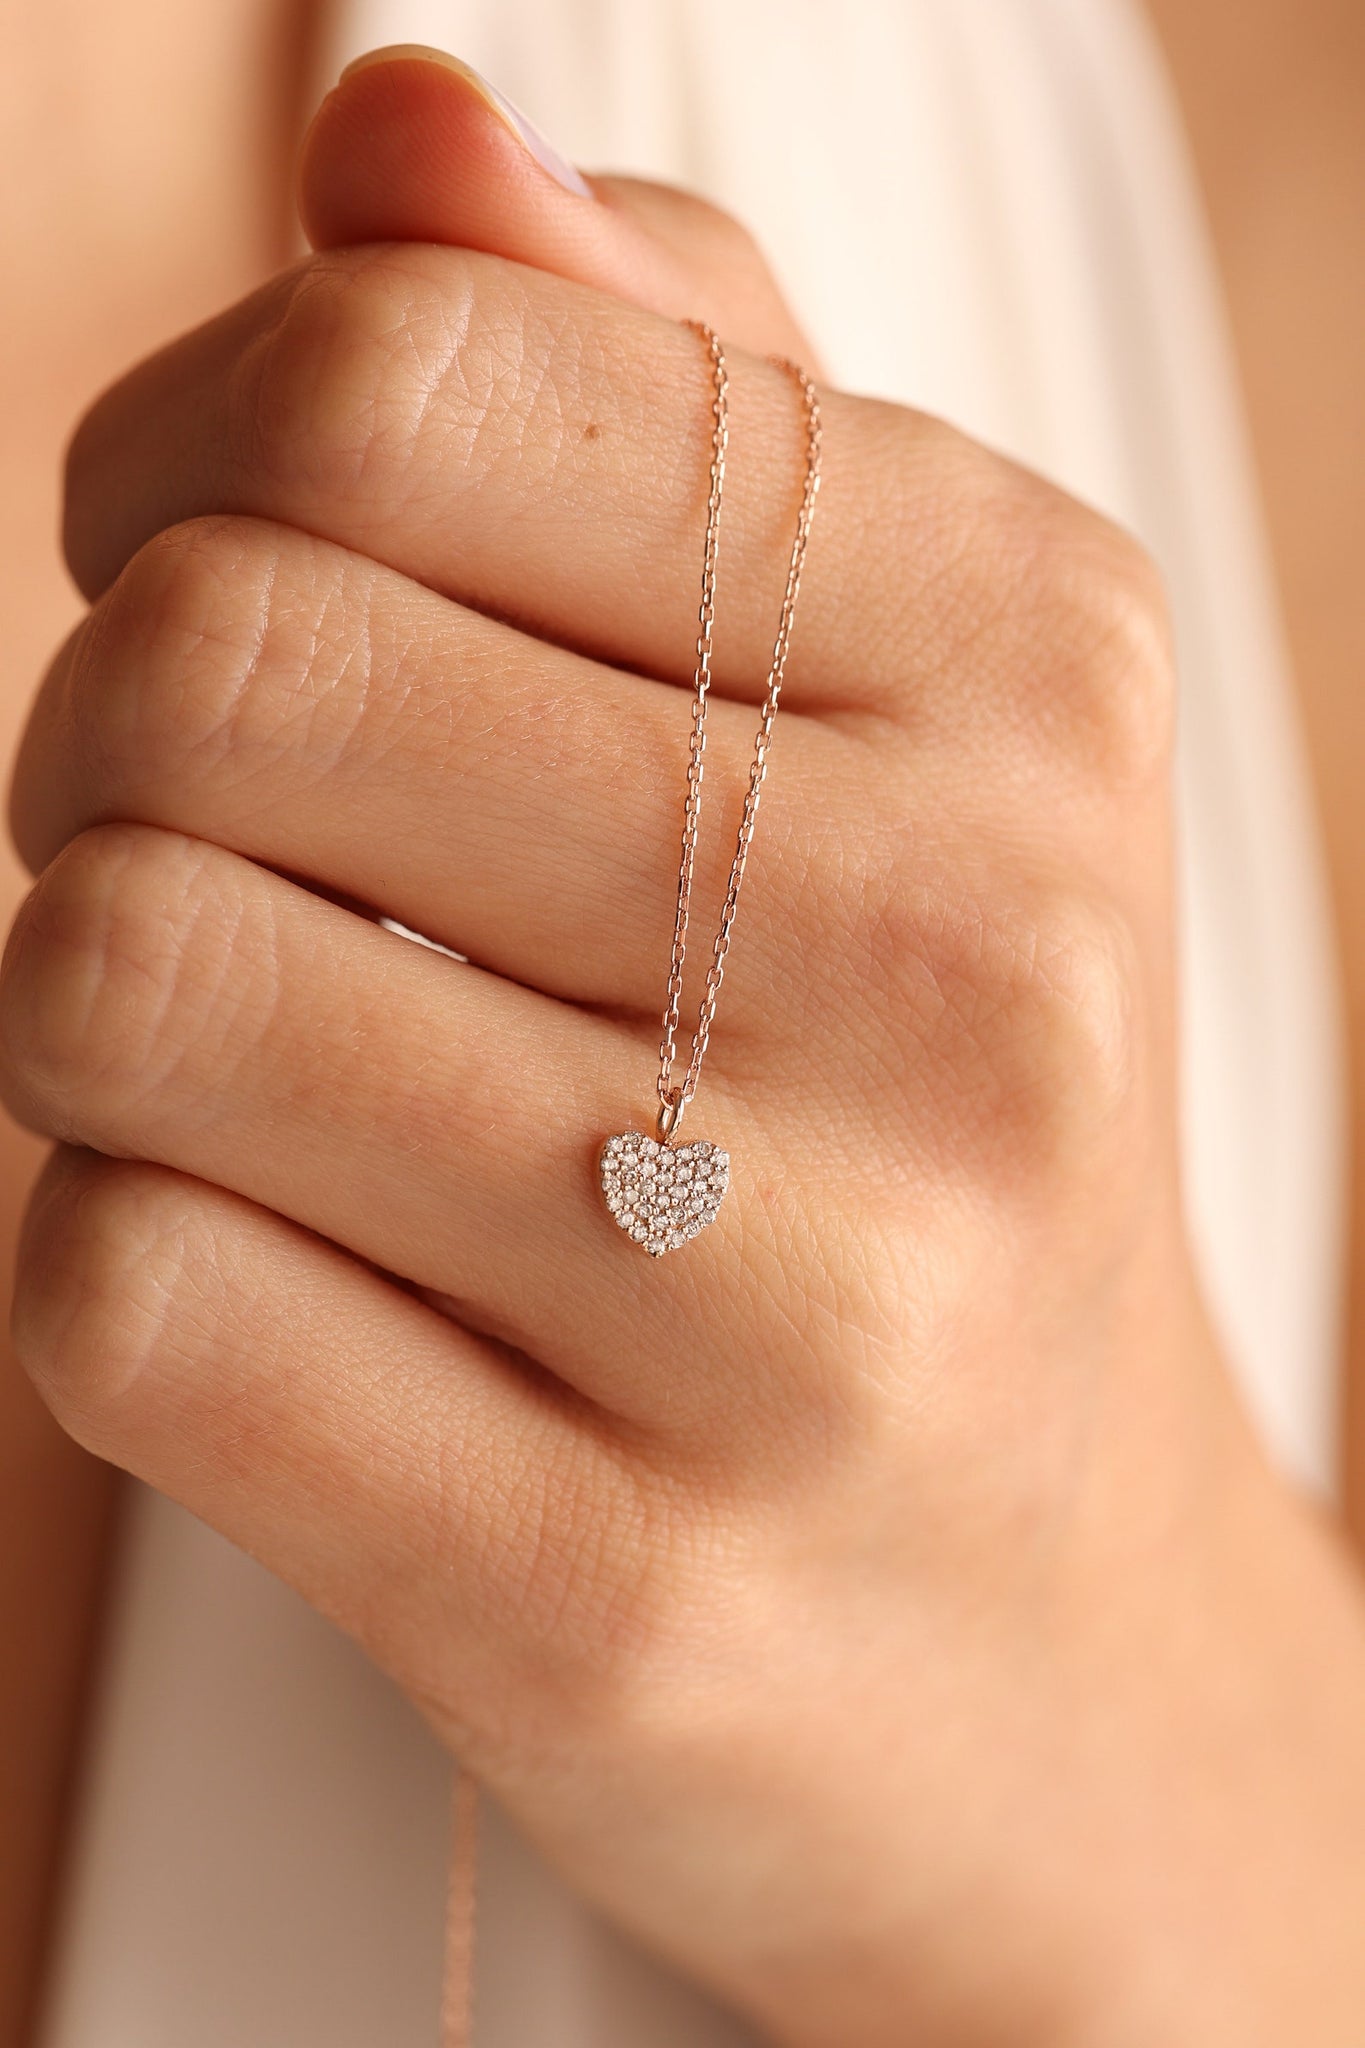 Heart Shape Pendant Necklace Minimalist Diamond Necklace Anniversary Gift For Her